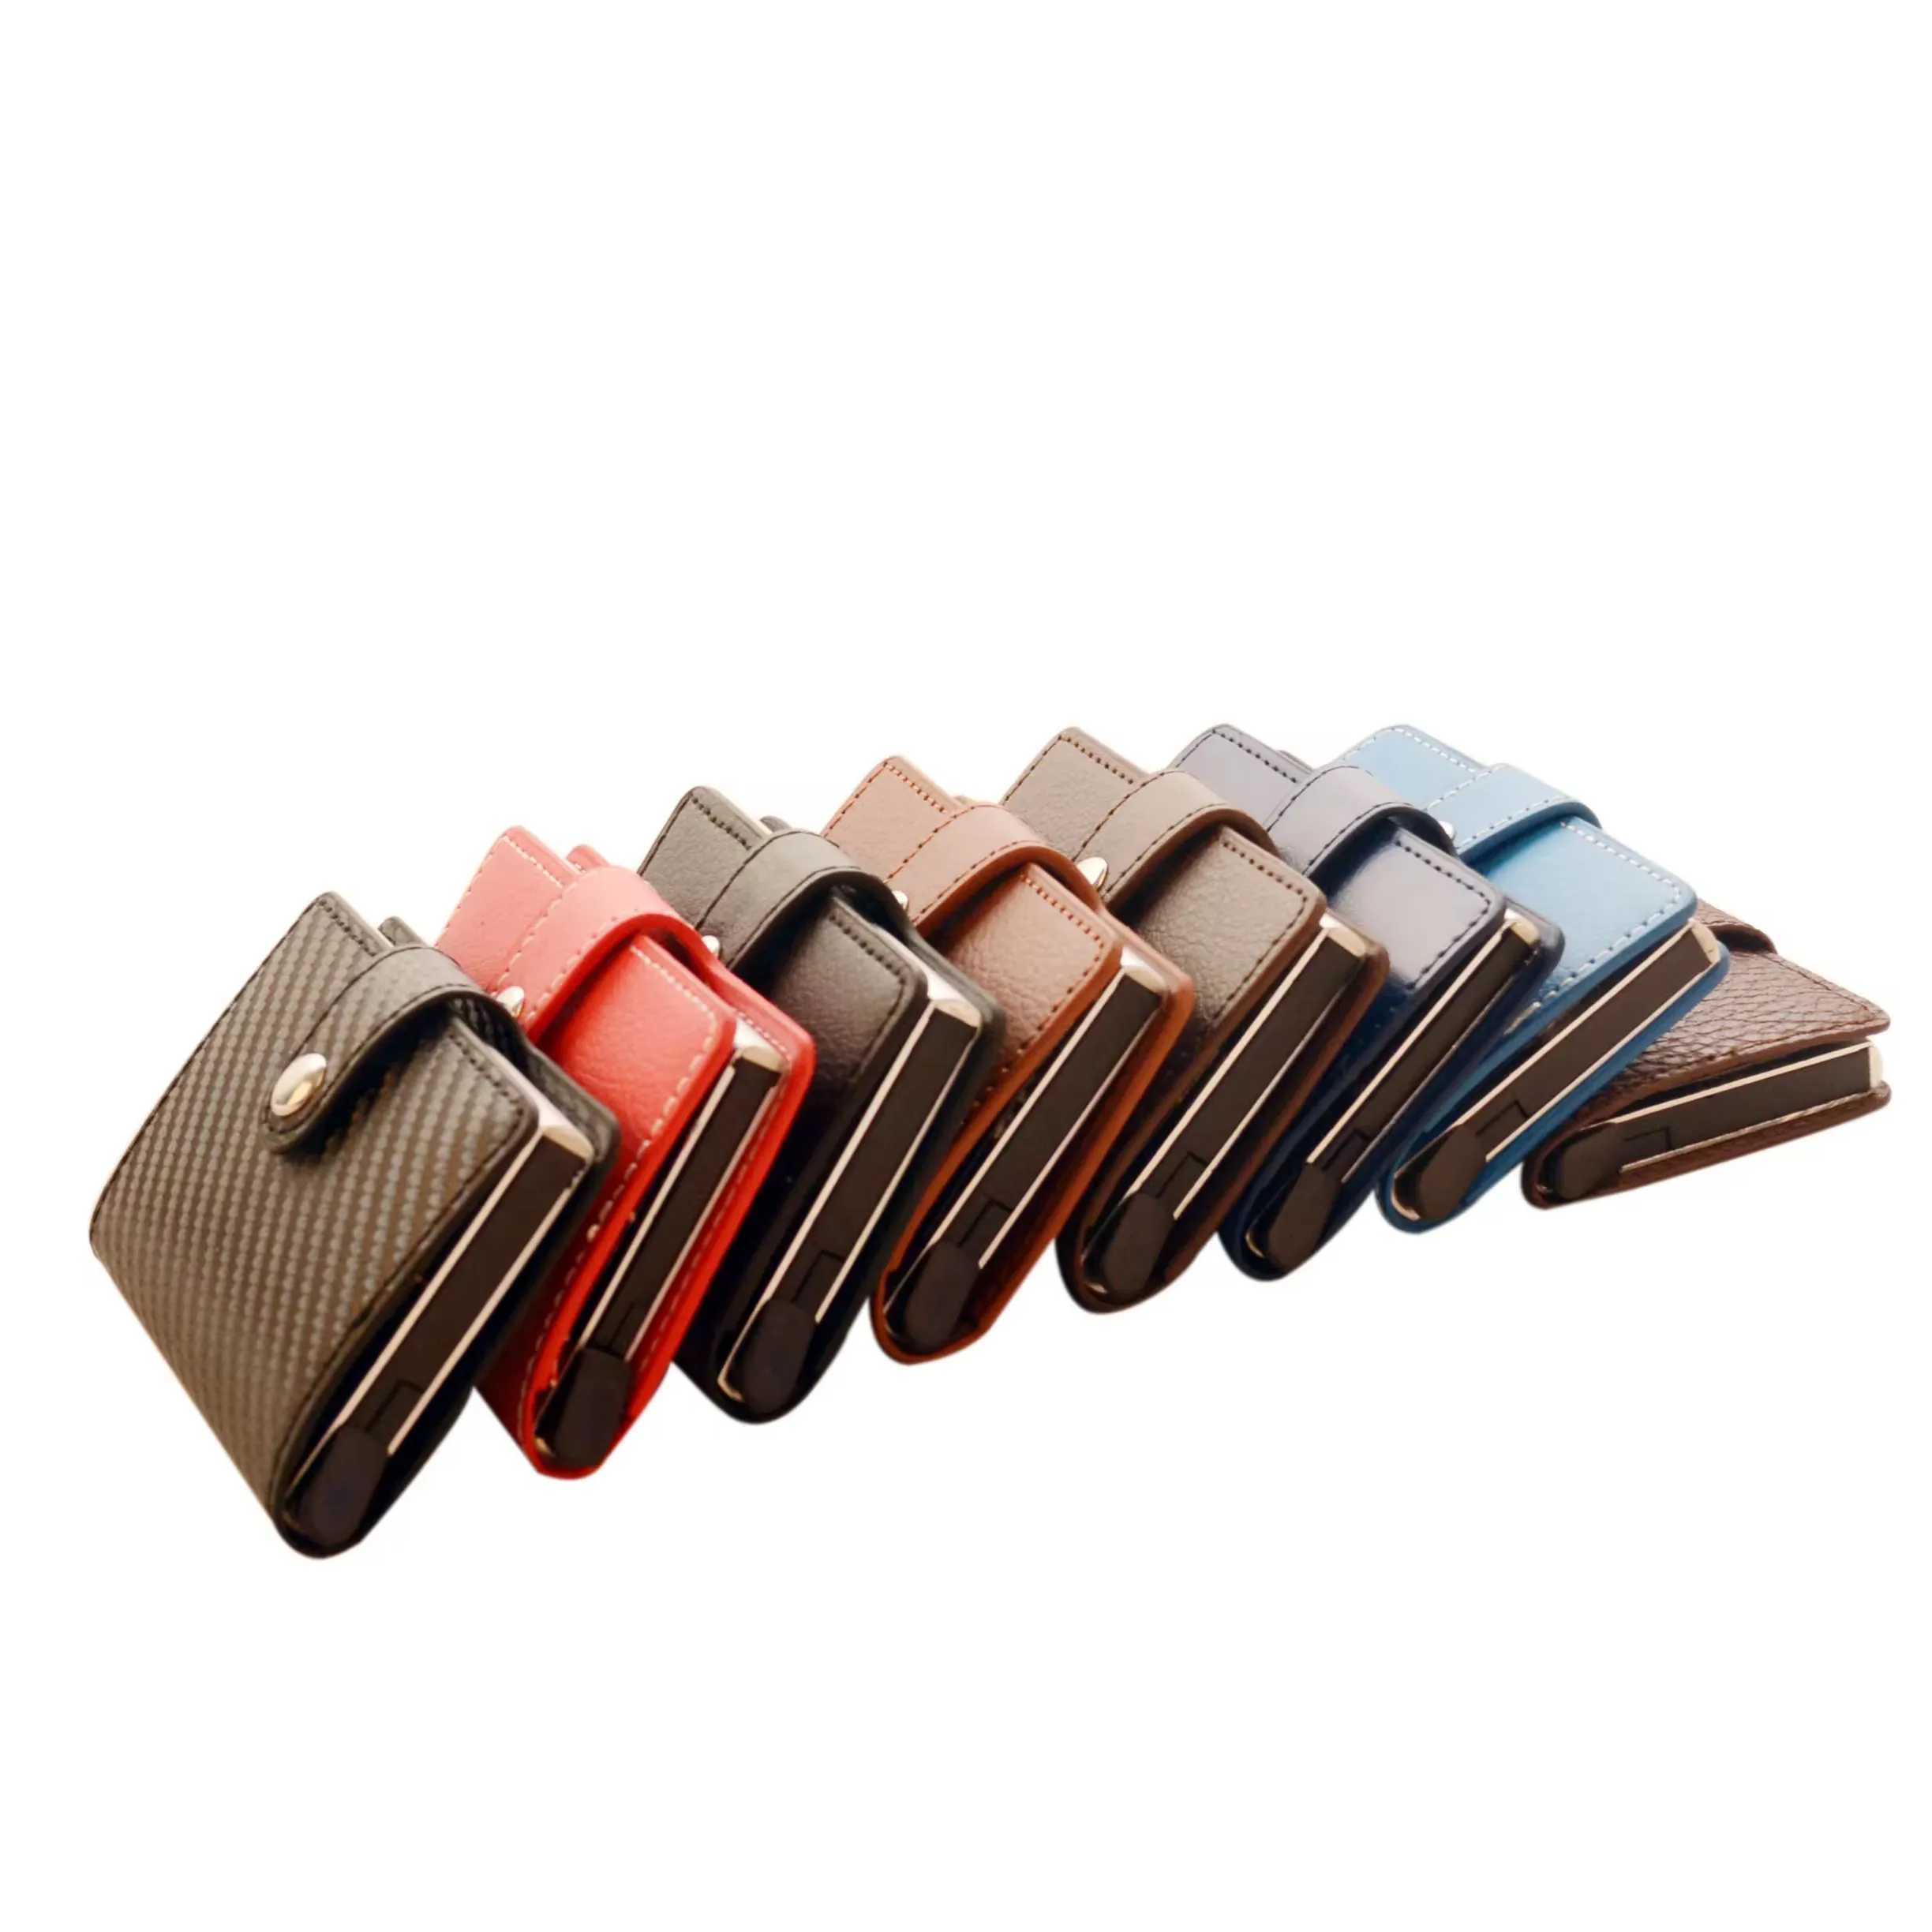 Elegant and Durable Leather Card Holder for Convenient Organization